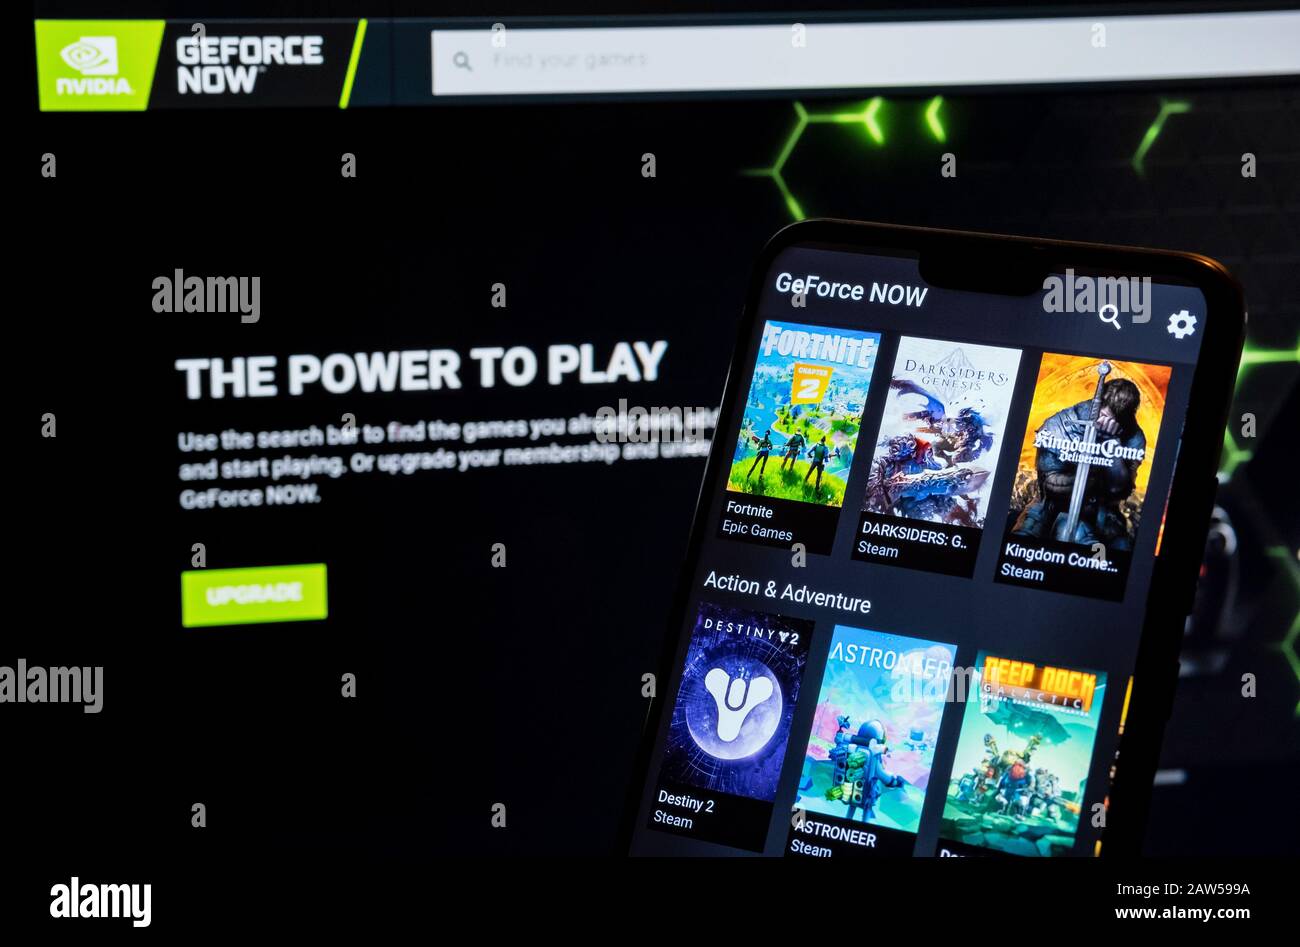 GeForce NOW Cloud Gaming - Apps on Google Play